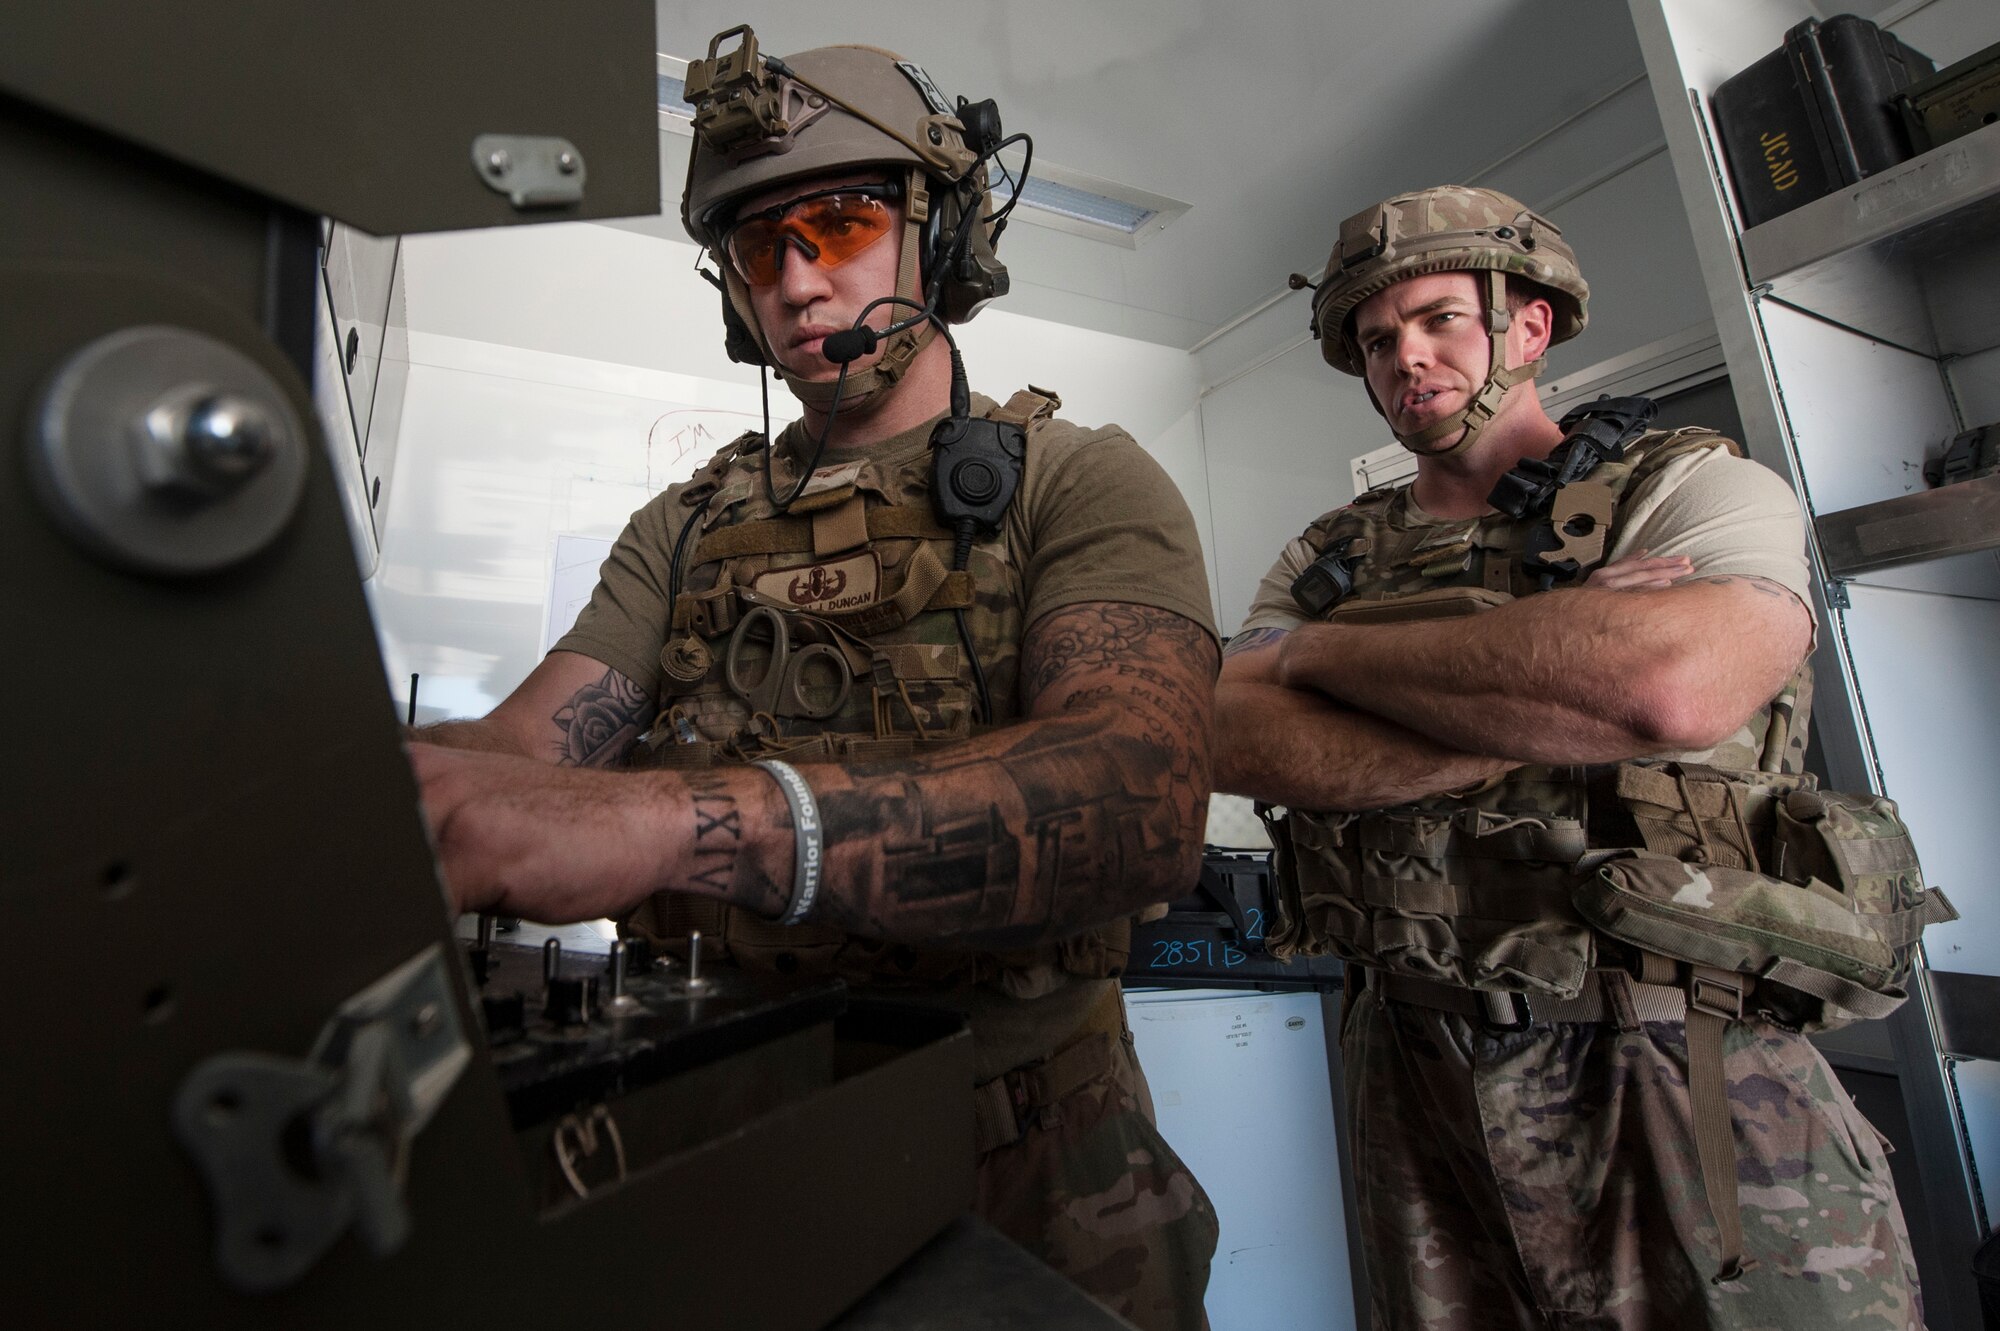 Staff Sgt. Cameron Duncan and Tech. Sgt. Michael Case, both of the 379th Expeditionary Civil Engineer Squadron explosive, ordnance, and disposal (EOD) team, navigate a remote F6A Robotic Platform through rocky terrain during a VBIED response training exercise Dec. 18, 2018, at Al Udeid Air Base, Qatar. Training participants utilized an F6A robotic platform, the bomb suit, and other specific tools to disrupt a VBIED during the exercise. (U.S. Air Force photo by Tech. Sgt. Christopher Hubenthal)